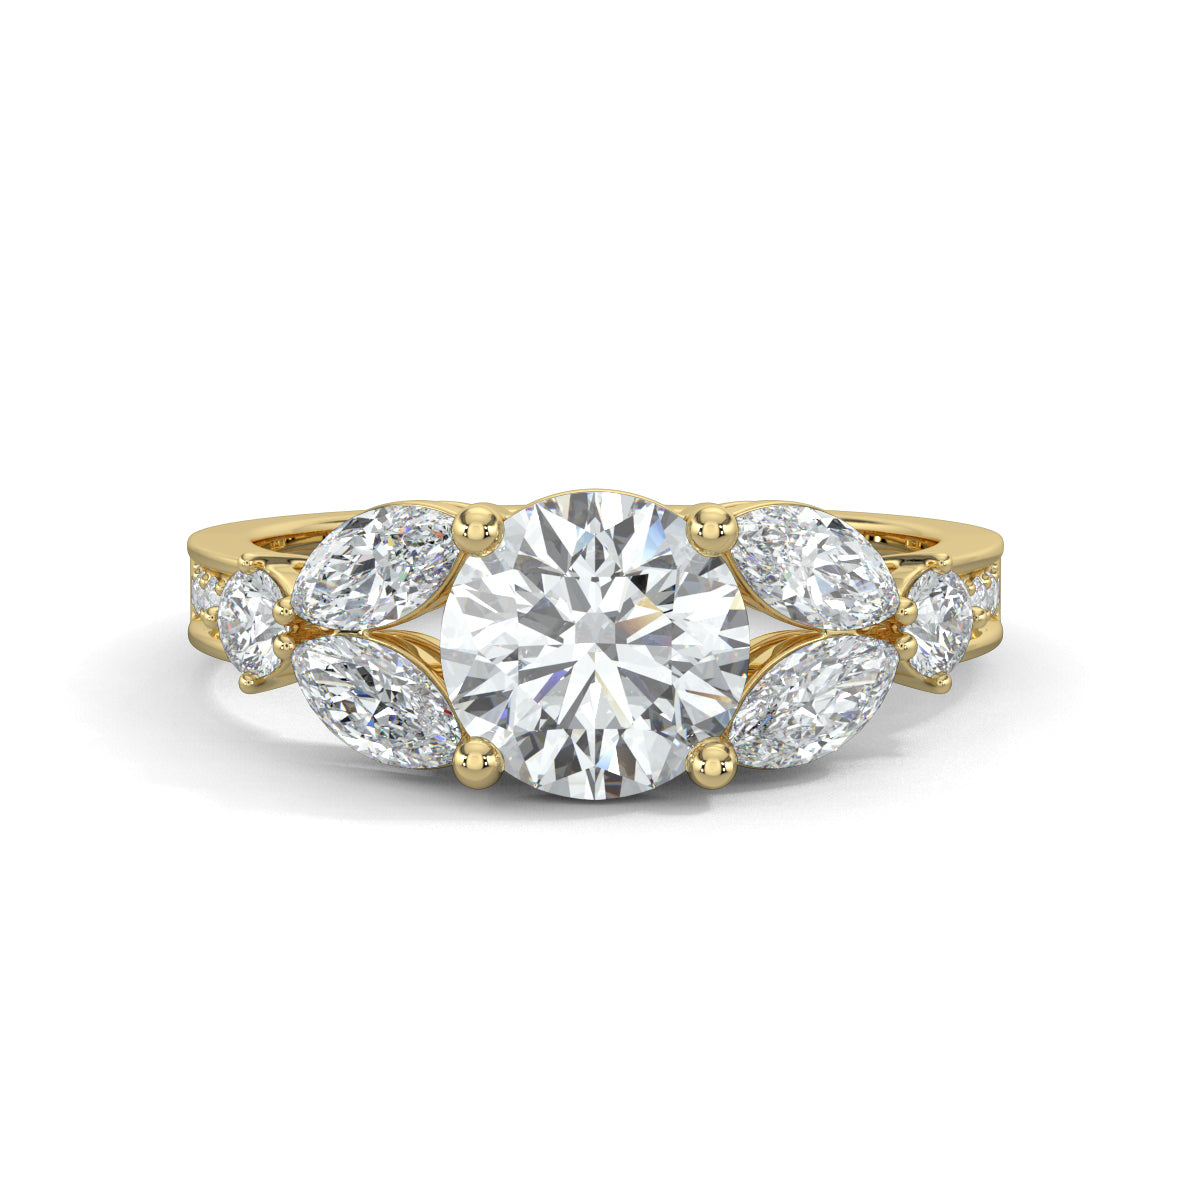 Yellow Gold, Diamond Ring, Round solitaire ring, Marquise diamonds, Natural diamonds, Lab-grown diamonds, Pave diamonds, Ethical jewelry, Classic band, Timeless elegance